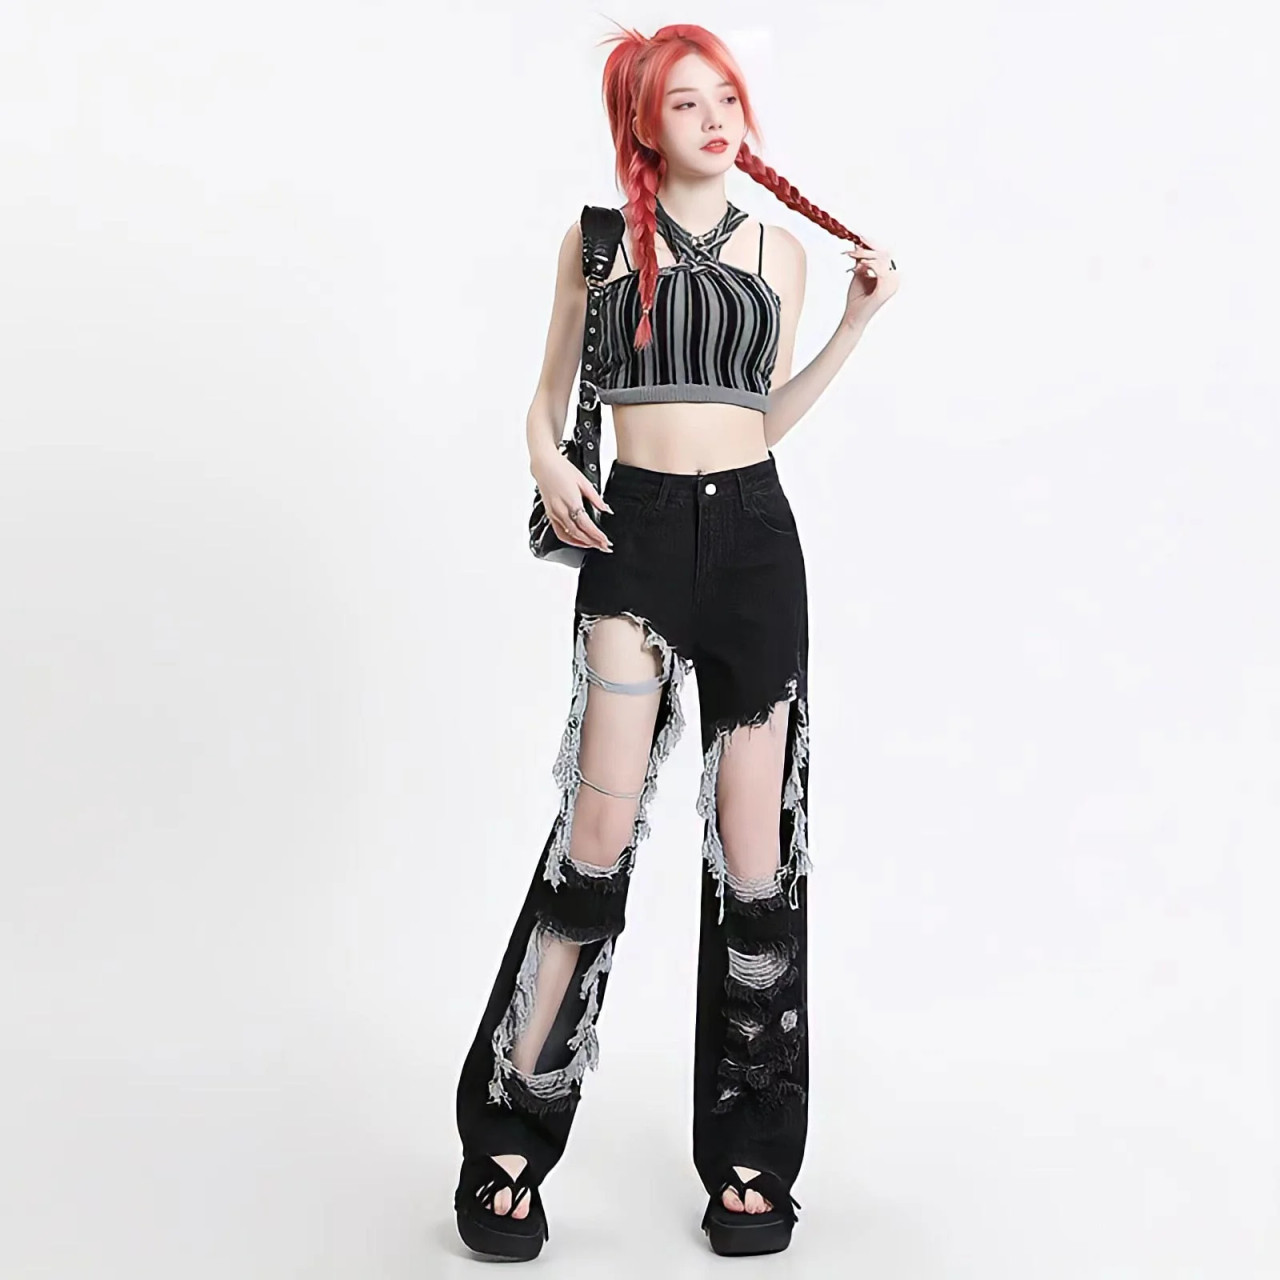 Grunge Aesthetic Extreme Ripped Jeans - Cosmique Studio